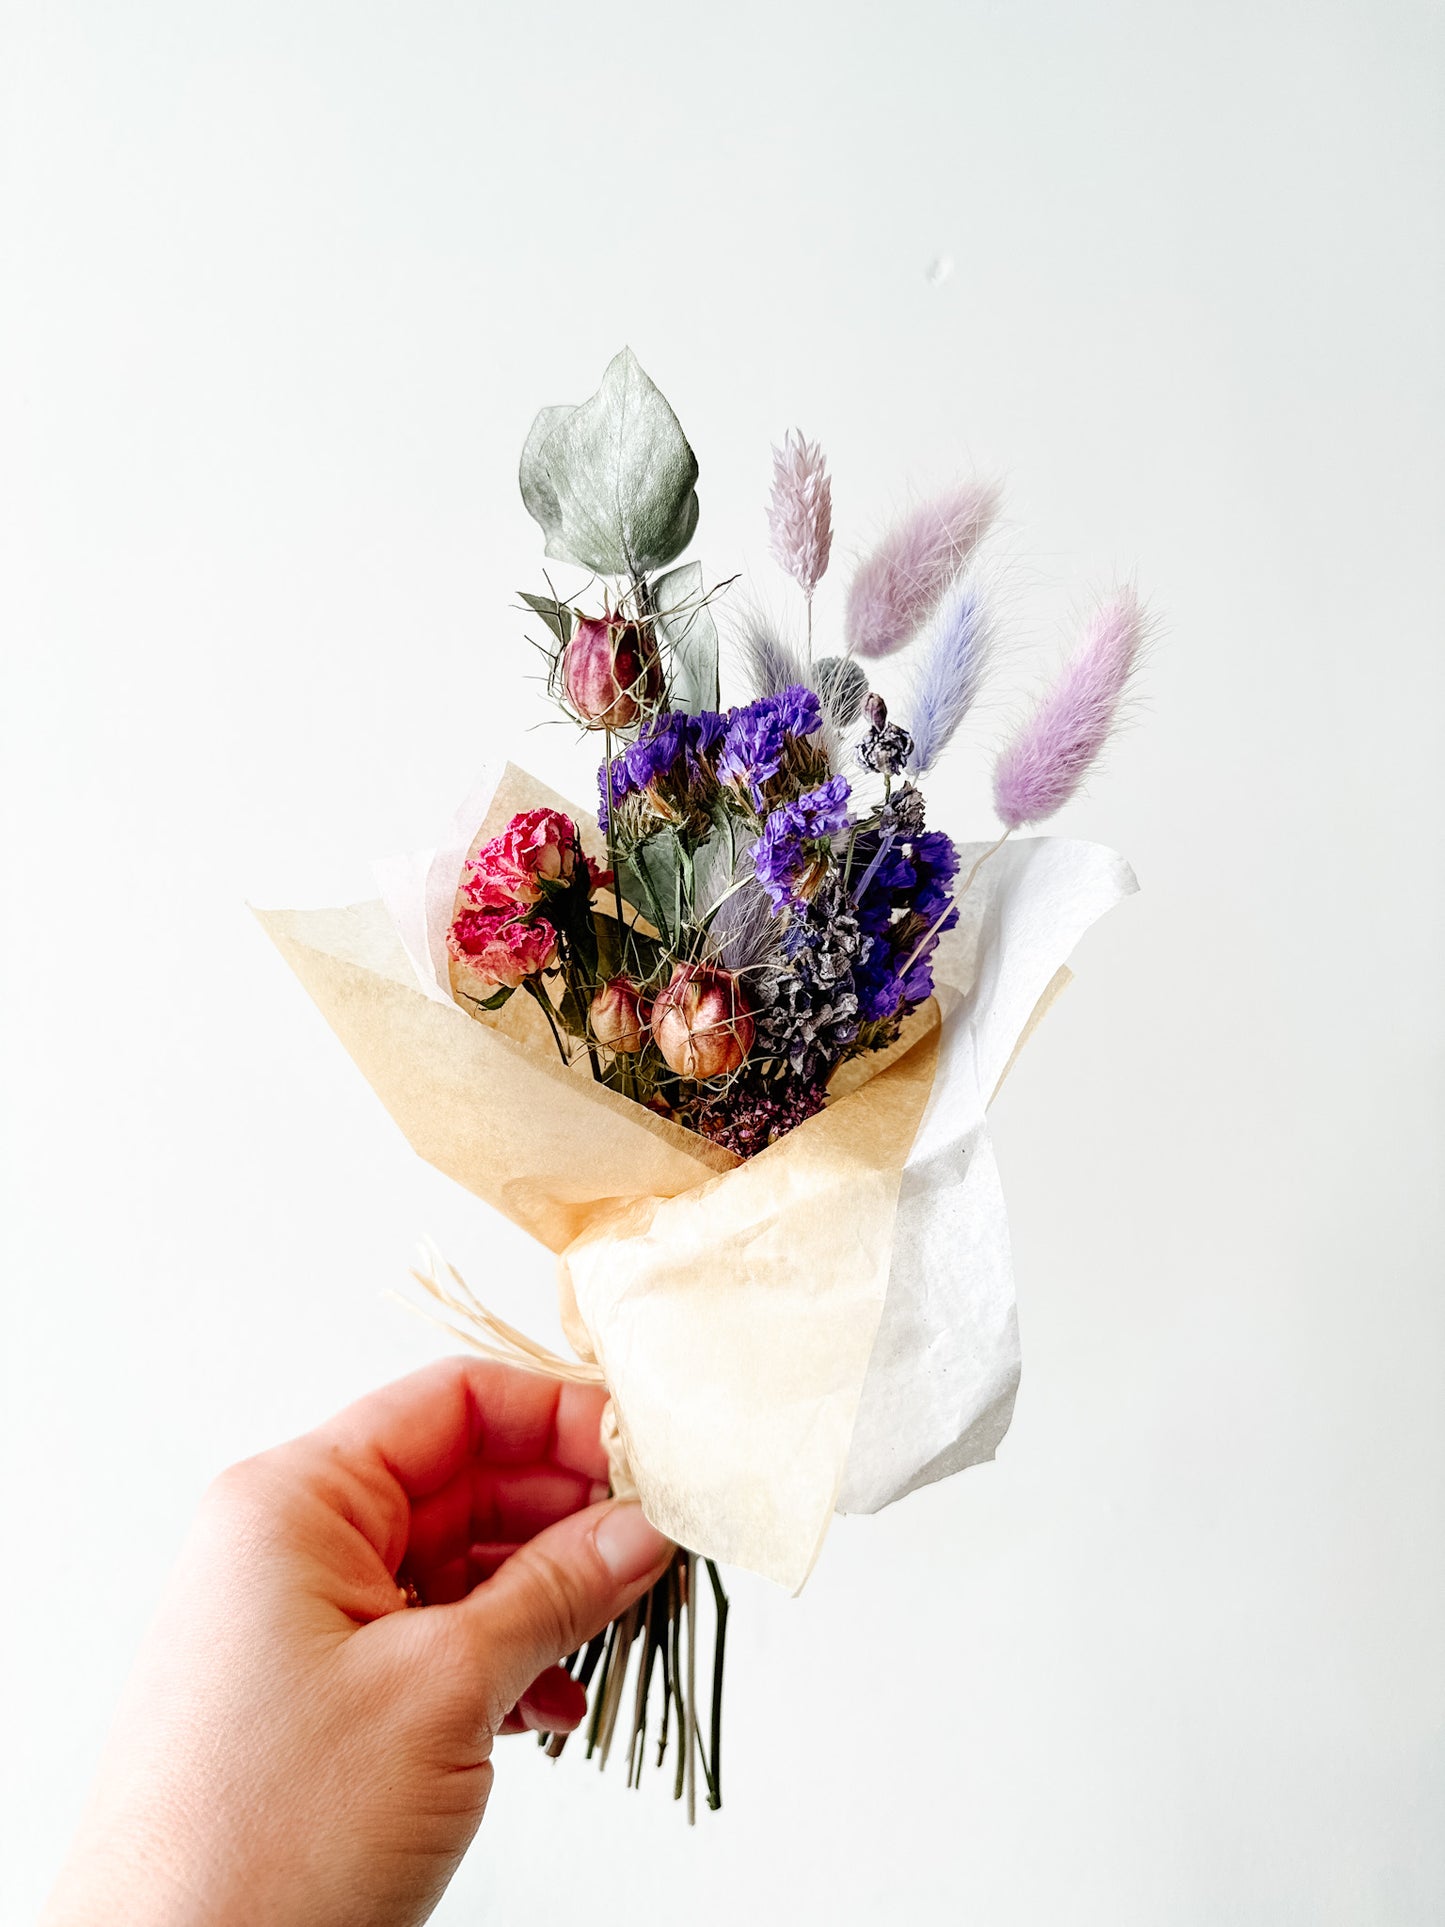 
                  
                    Val/Gal-entine’s Day Everlasting Posy
                  
                